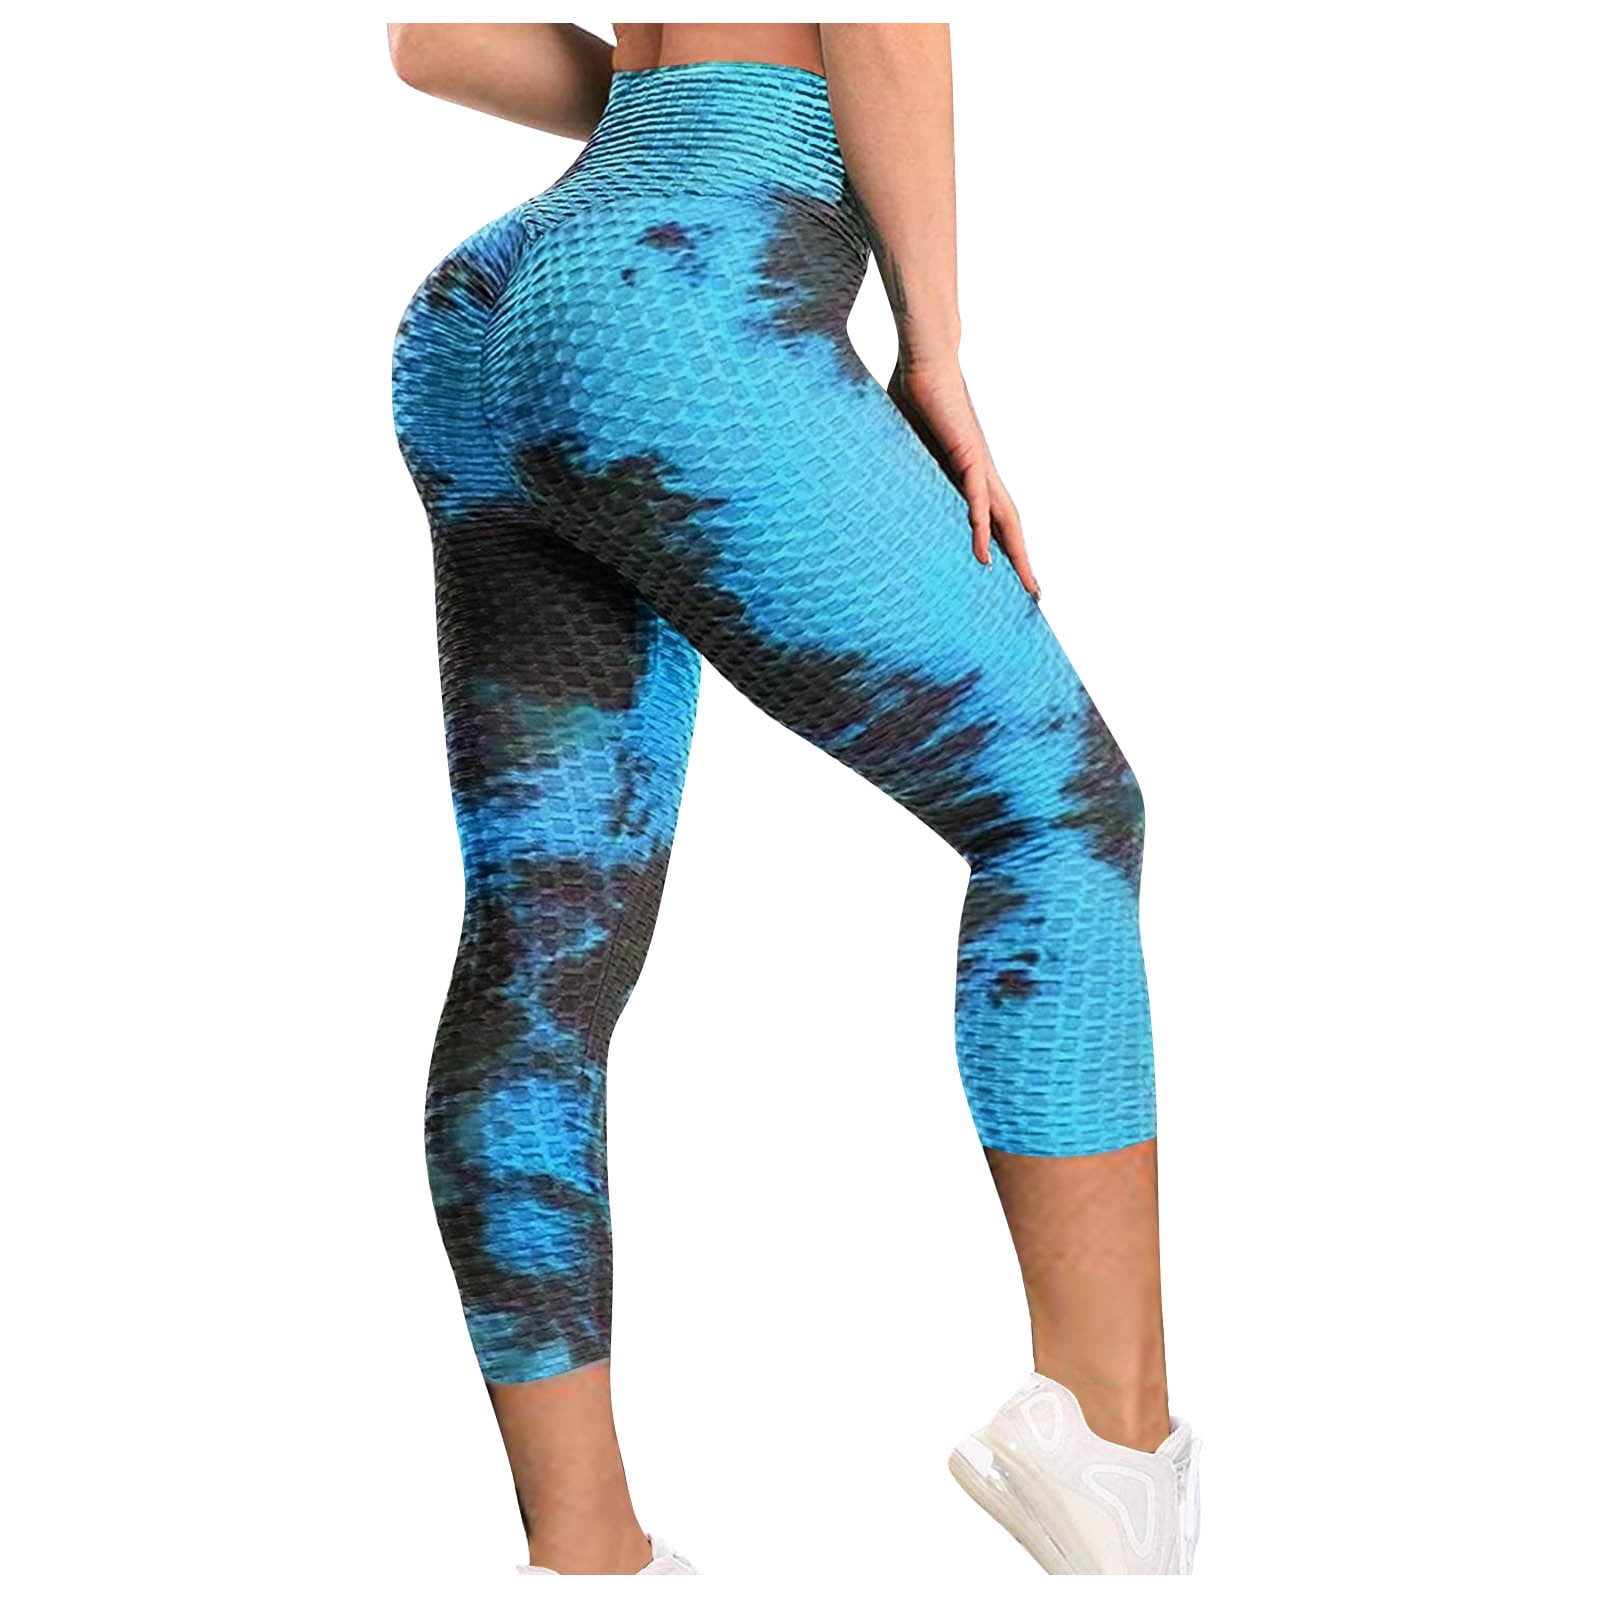 Ayolanni Leather Leggings for Women Women's Tie-Dye Breathable Hip Lifting  Exercise Bubble Yoga Pants 